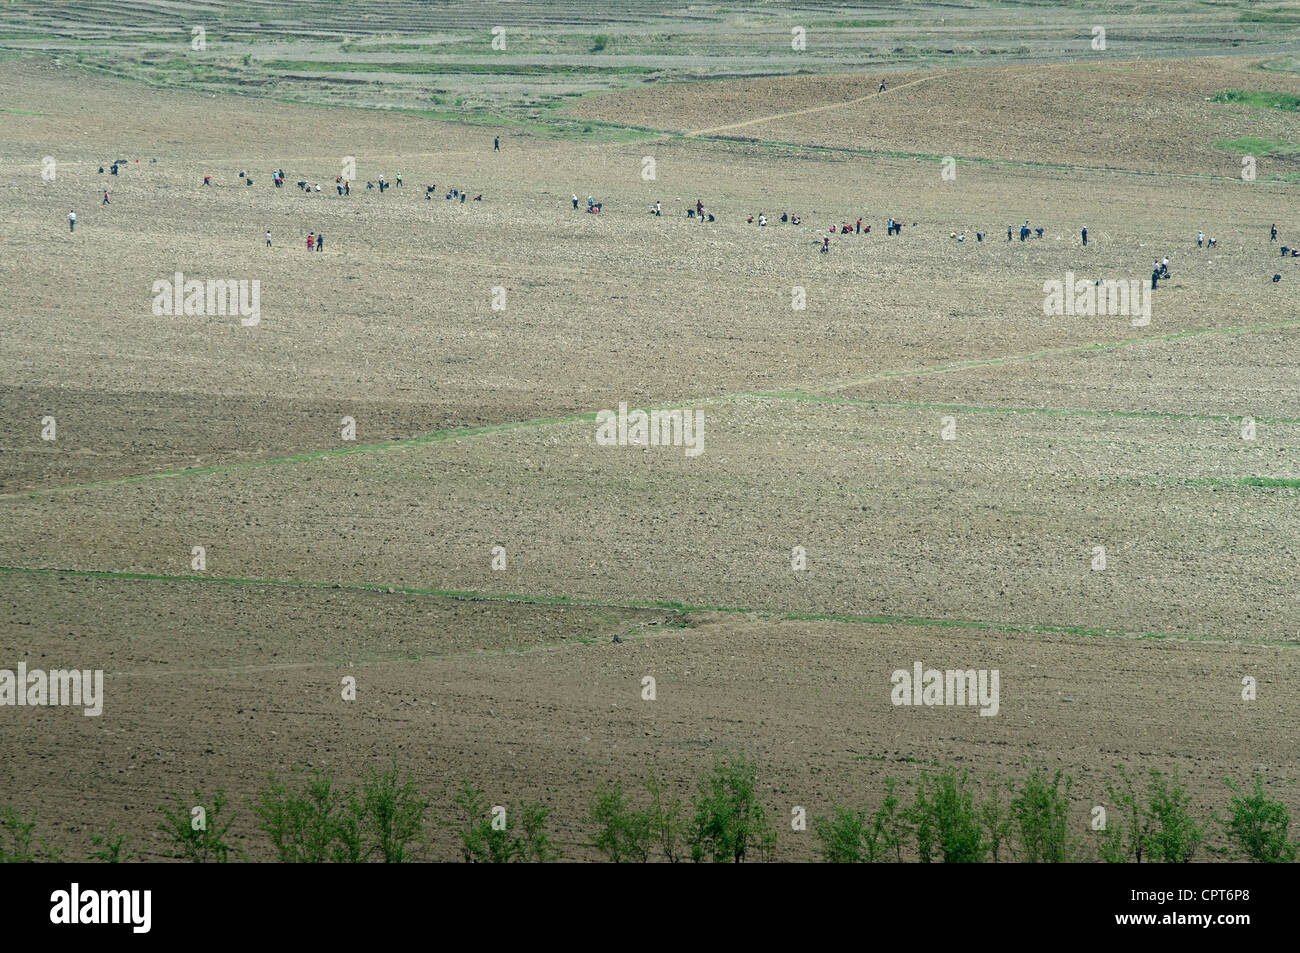 JI'AN, JILIN, CHINA; 20/05/2012. North Koreans are seen working in a field across the Yalu River. North Korea has been reporting a serious drought that could mean more food shortages in a country plagued by lack of sufficient food and harvest. Help is however unlikely to come from the United States or South Korea following Pyongyang's recent rocket launch. © Olli Geibel Stock Photo